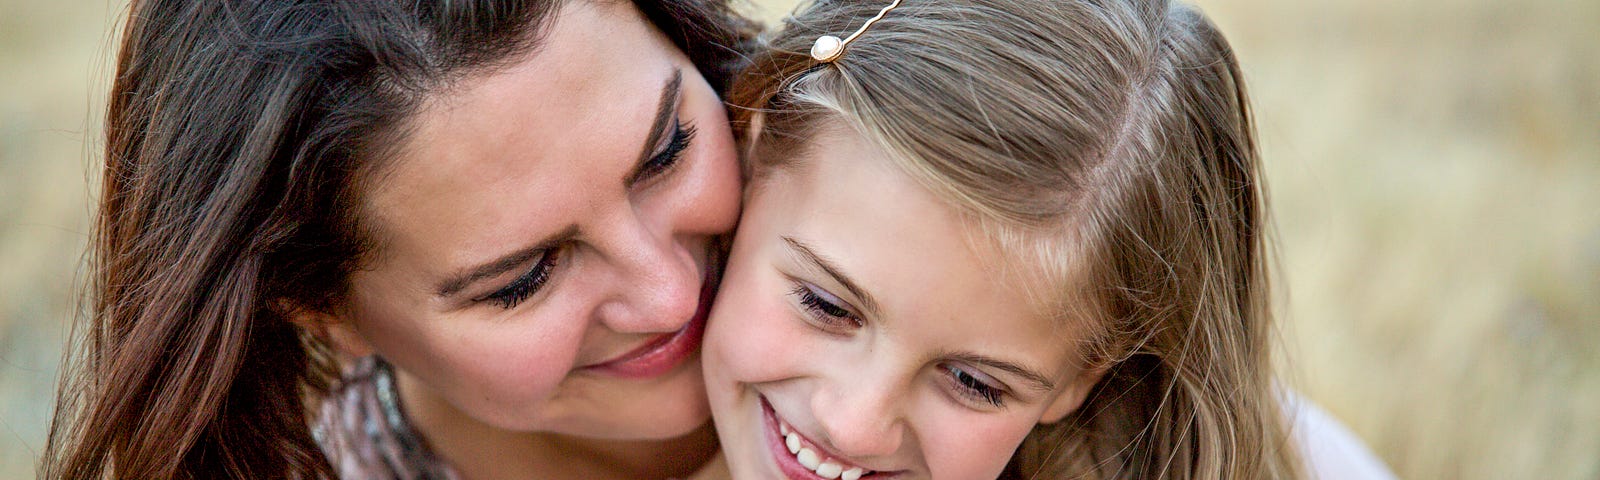 Smiling woman embracing a smiling child